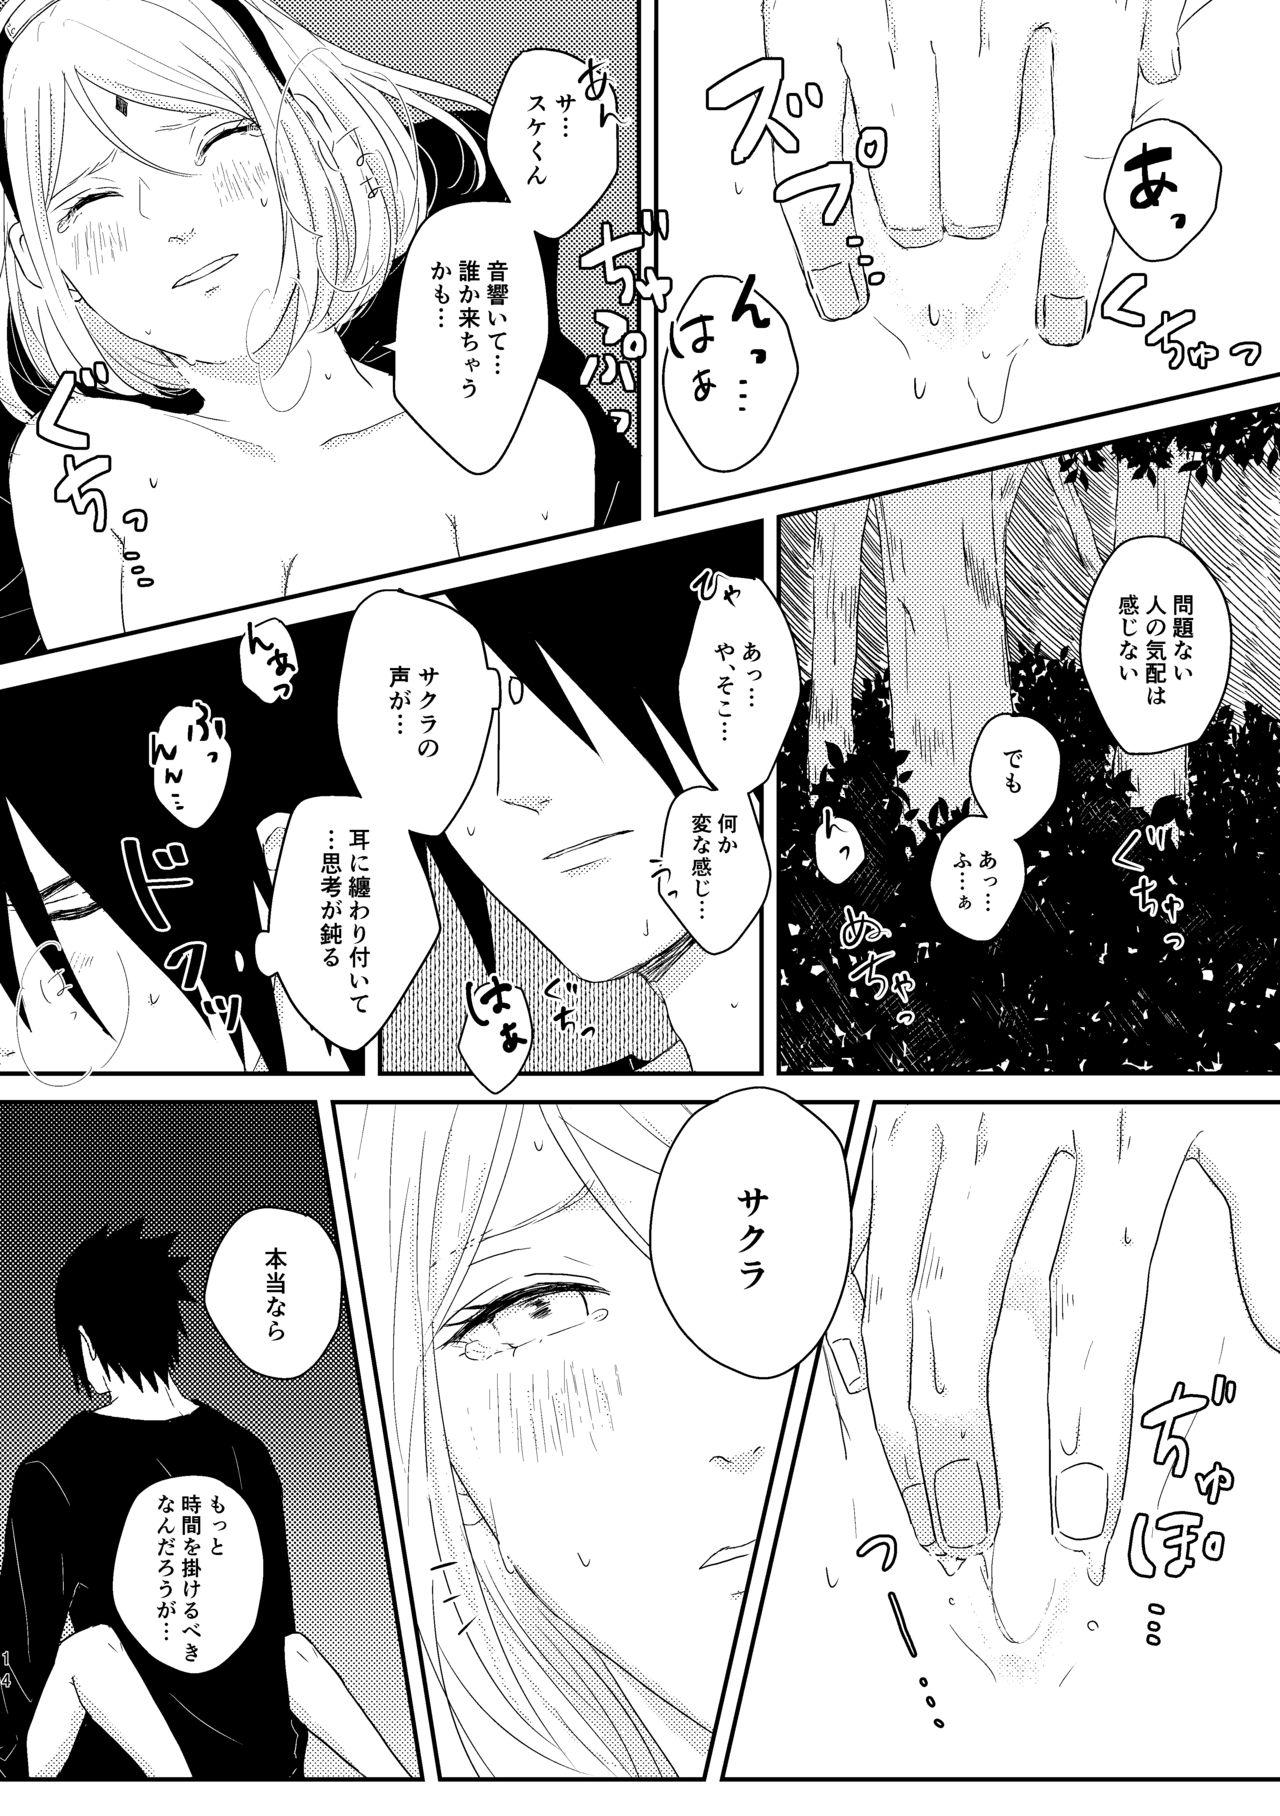 Best Blowjobs Ever sssk* - Naruto Playing - Page 13